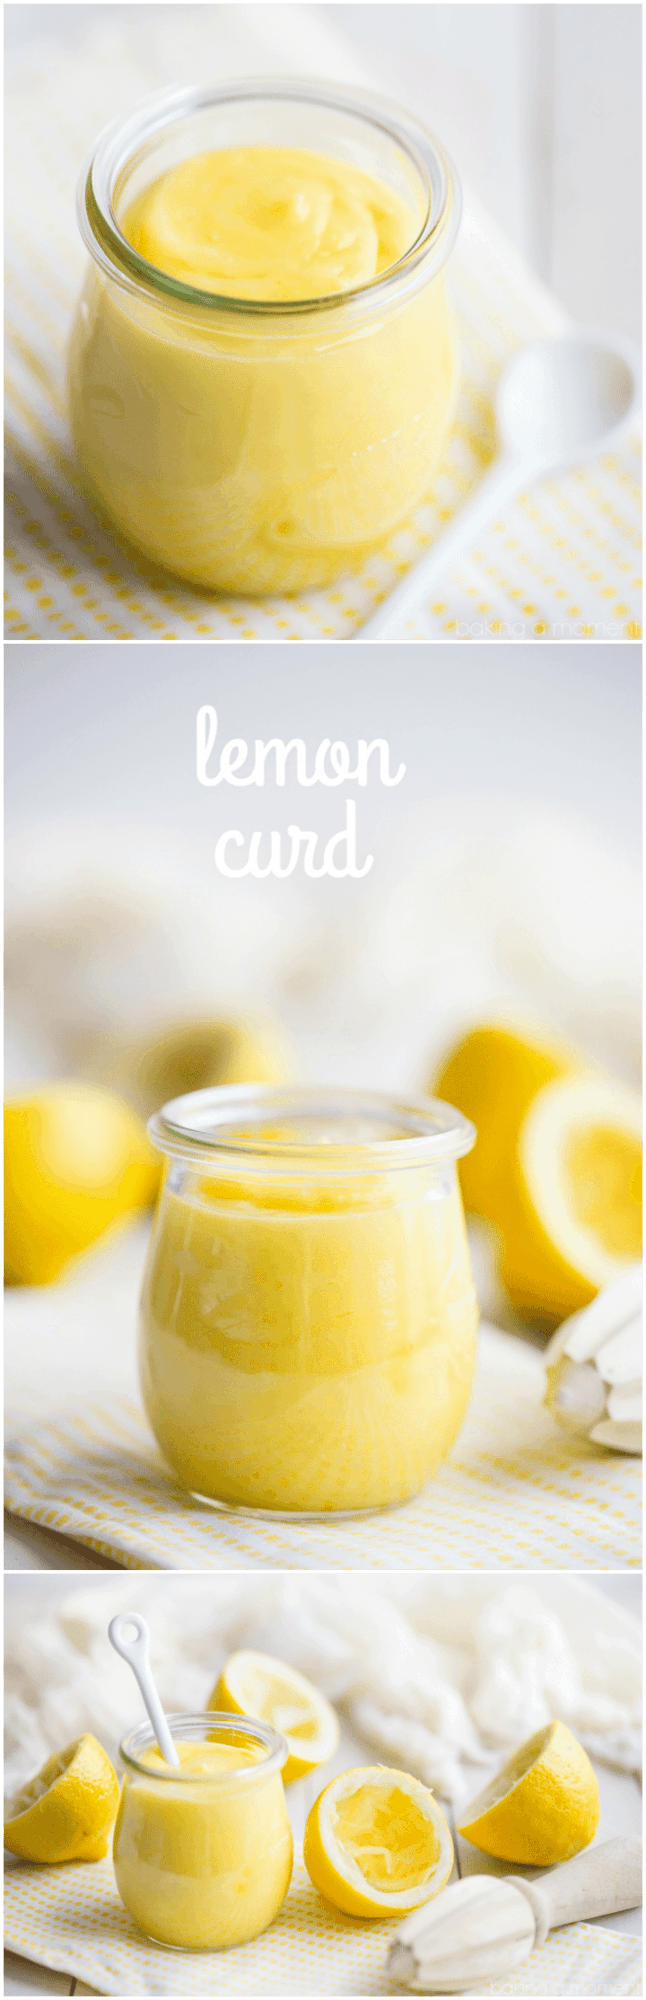 This lemon curd was a cinch to make and the flavor was so bomb! I'll be giving little jars as gifts this Christmas ;) 